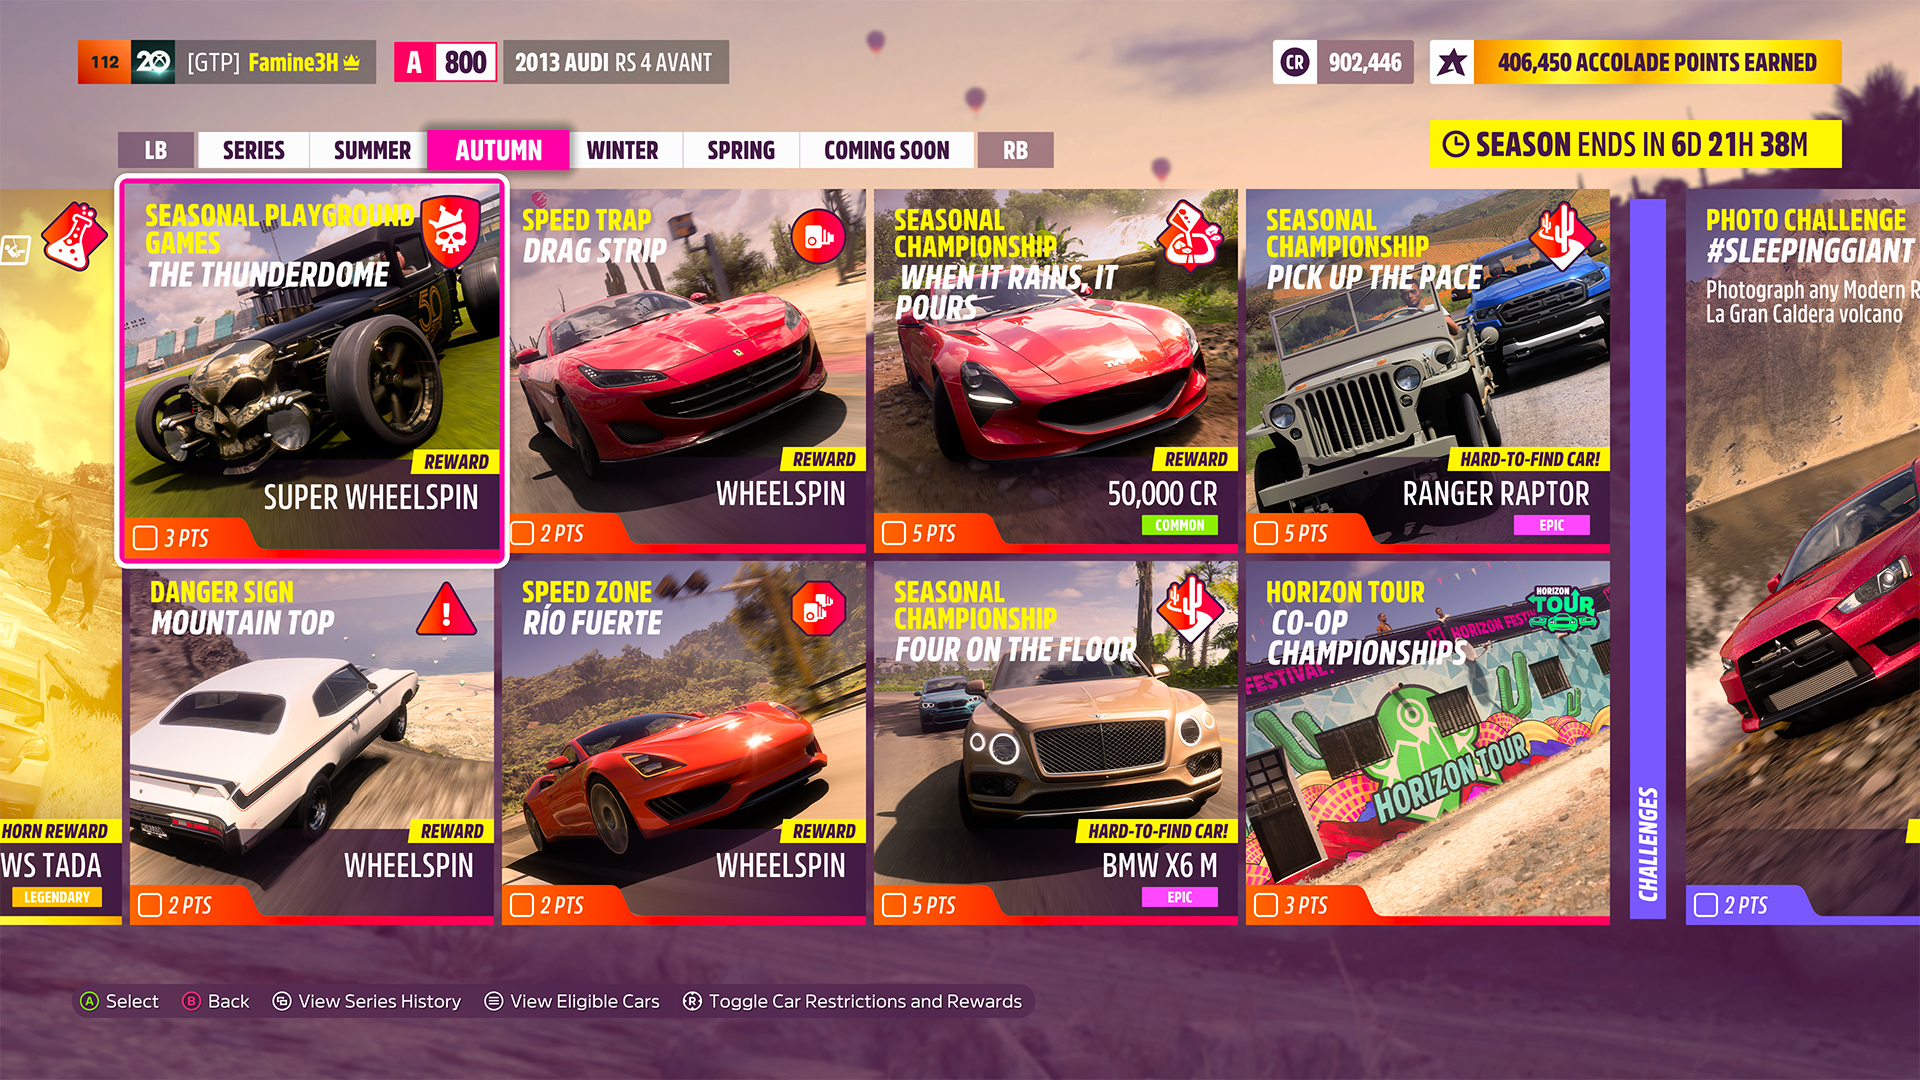 Forza Horizon 5 Series 5 update is available now with new cars, PR Stunts,  events, and bug fixes